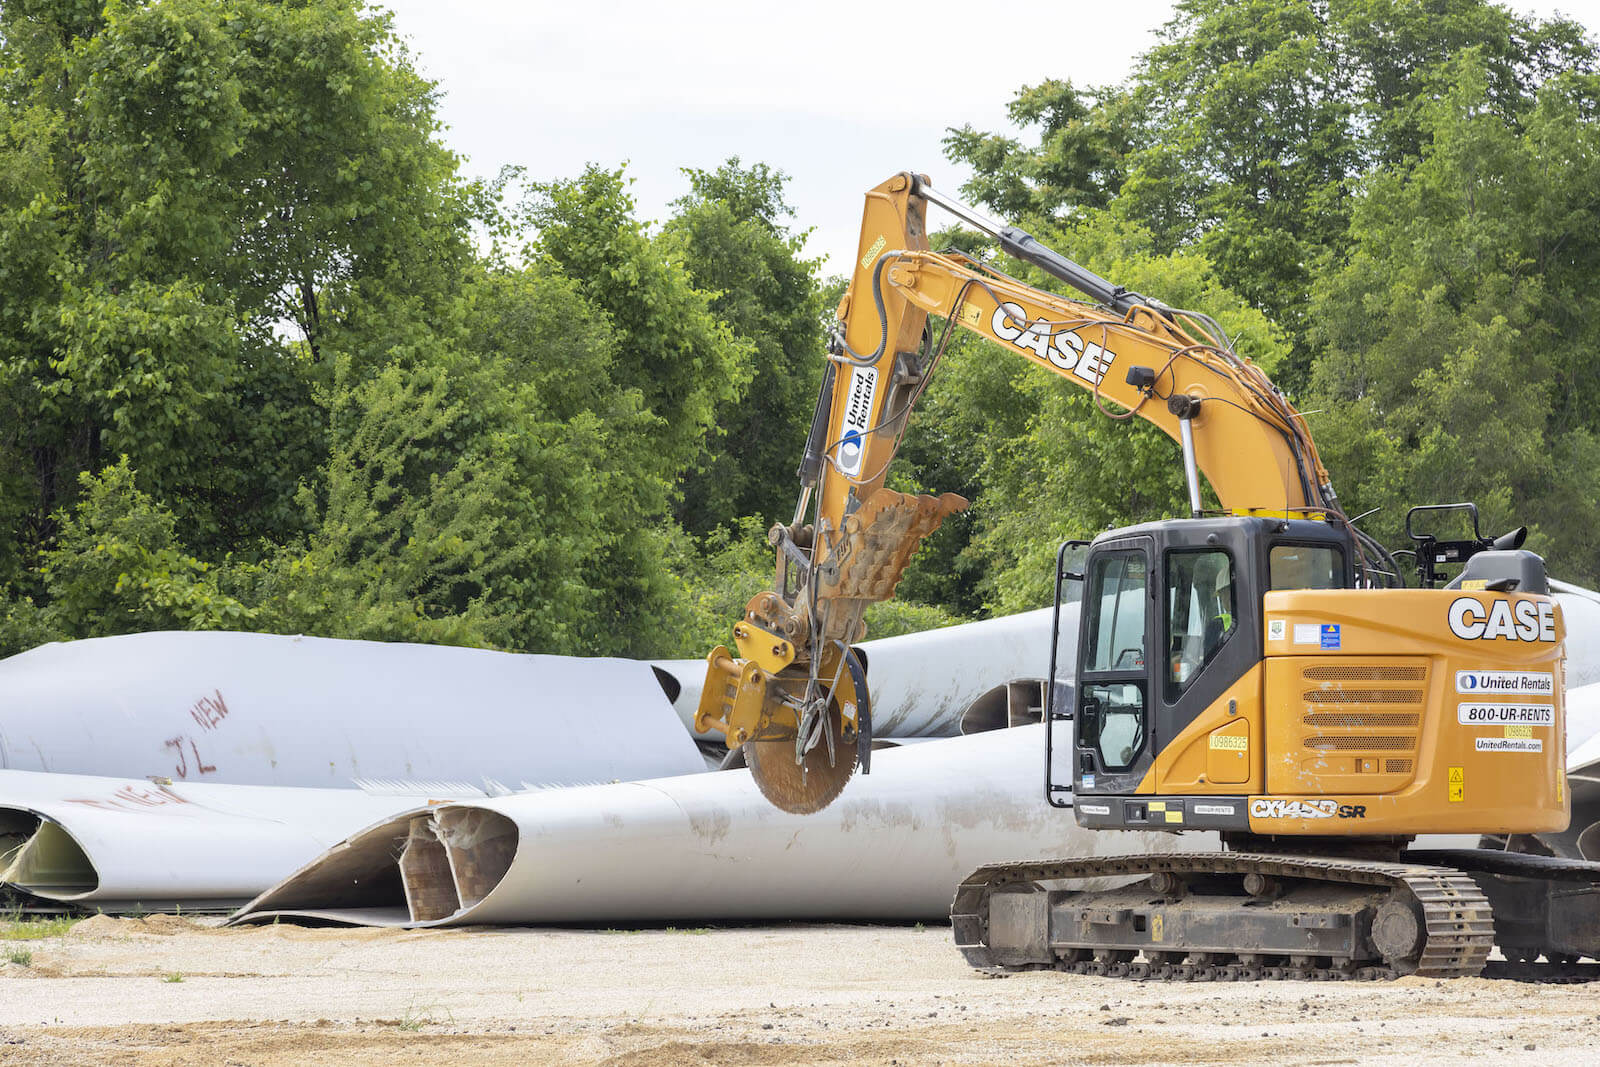 A bulldozer moves past wind turbine blades on the ground.